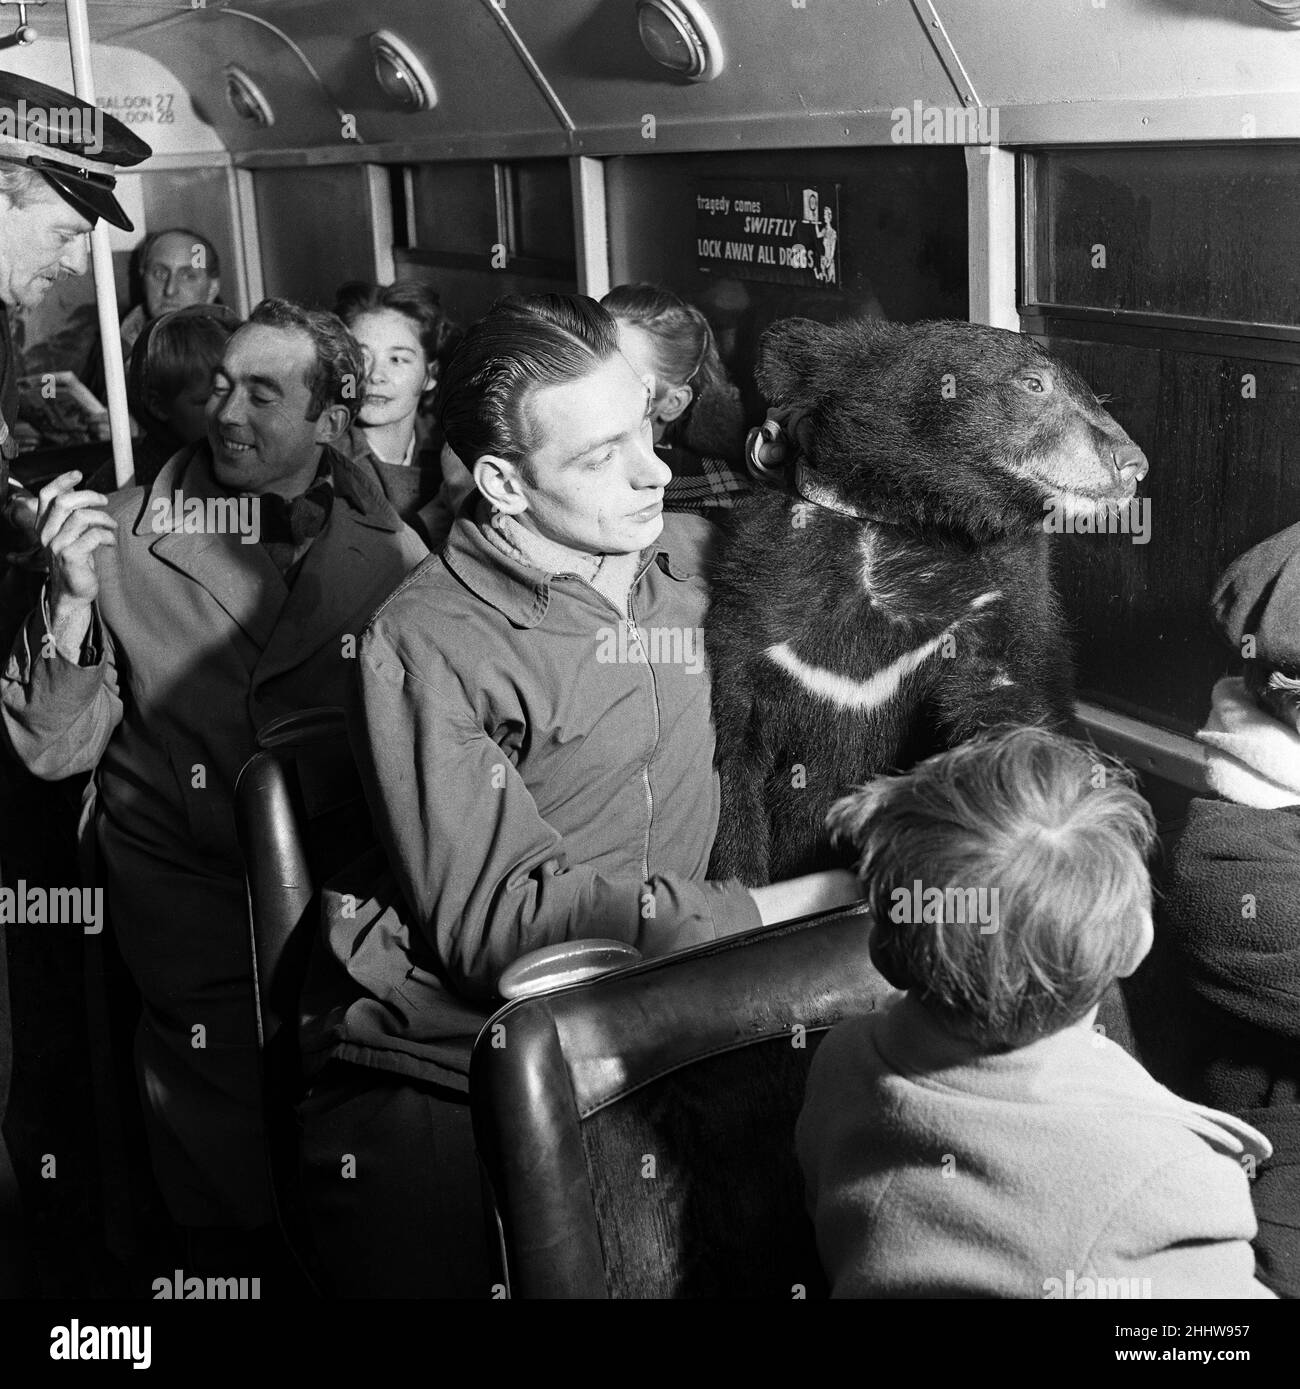 Animals are not allowed inside the bus but this bus is different for the animal inside the bus is star passenger Teddy, an 18-month-old Himalayan bear, a favourite of Smart's Winkfield Zoo in Berkshire. The bus is running a 'Zoo Special' that runs from Windsor to the Zoo. 31st December 1953. Stock Photo